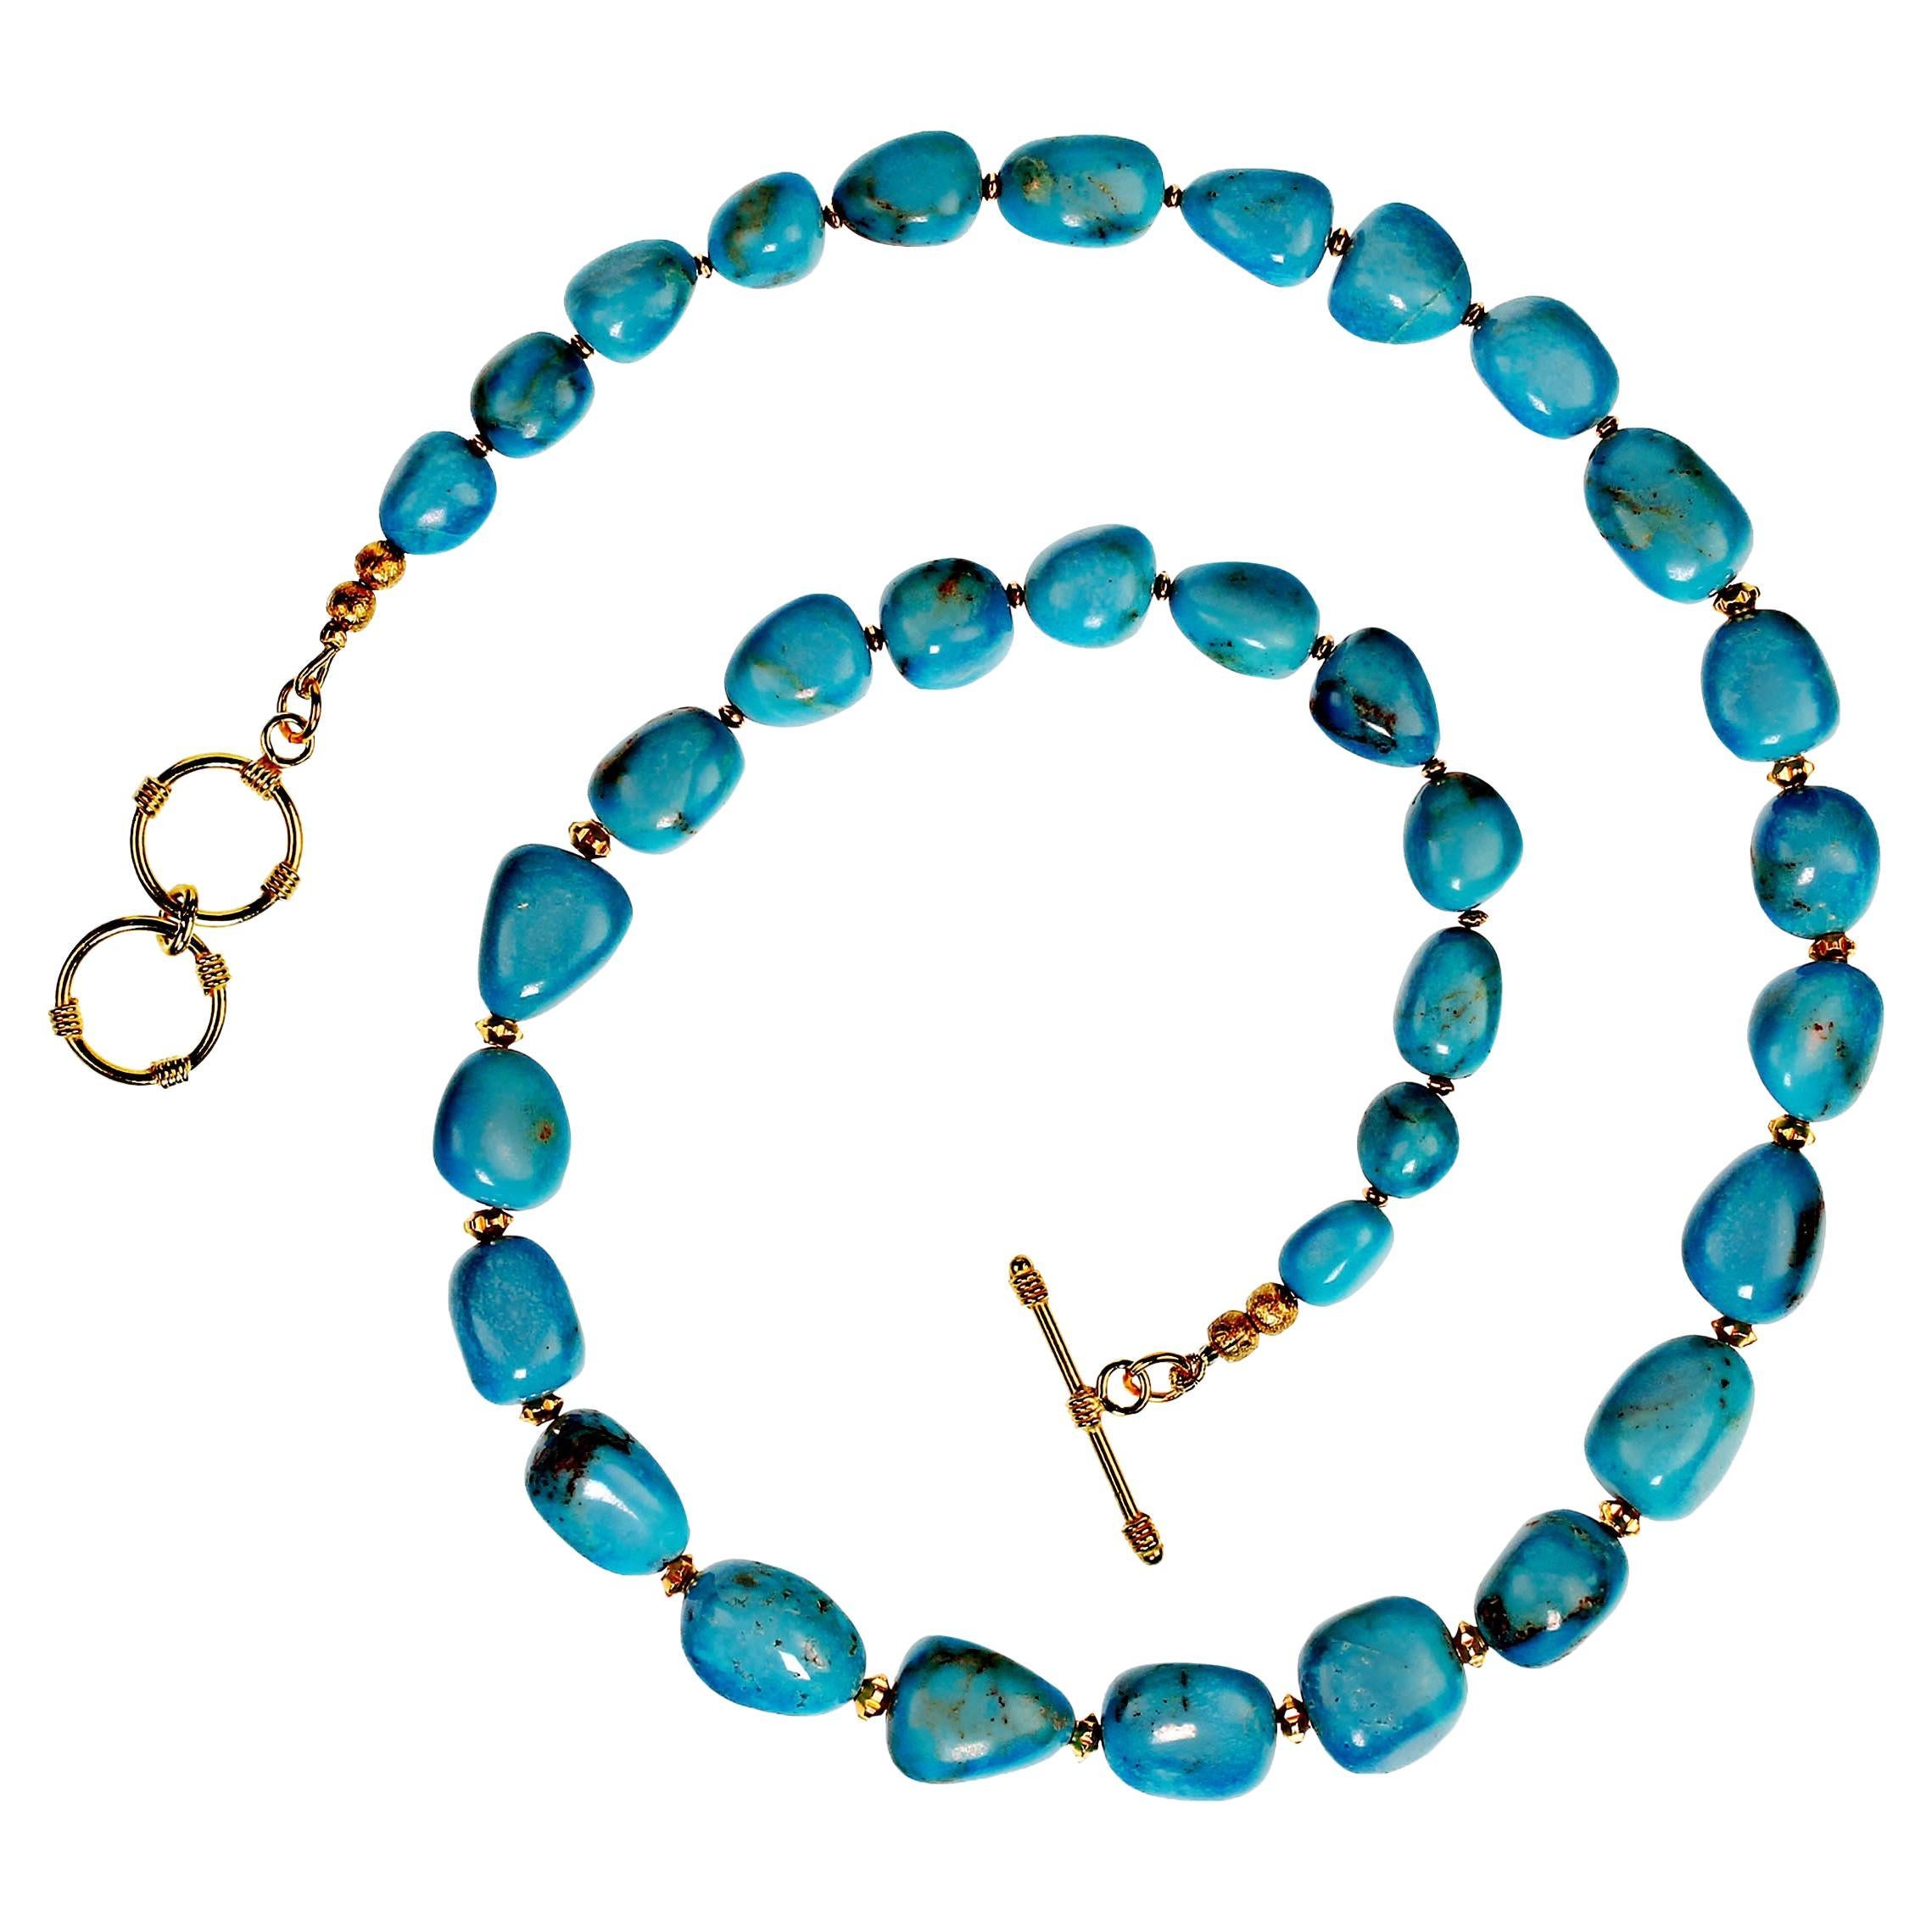 Bead AJD Stunning Sleeping Beauty Turquoise Nugget Necklace